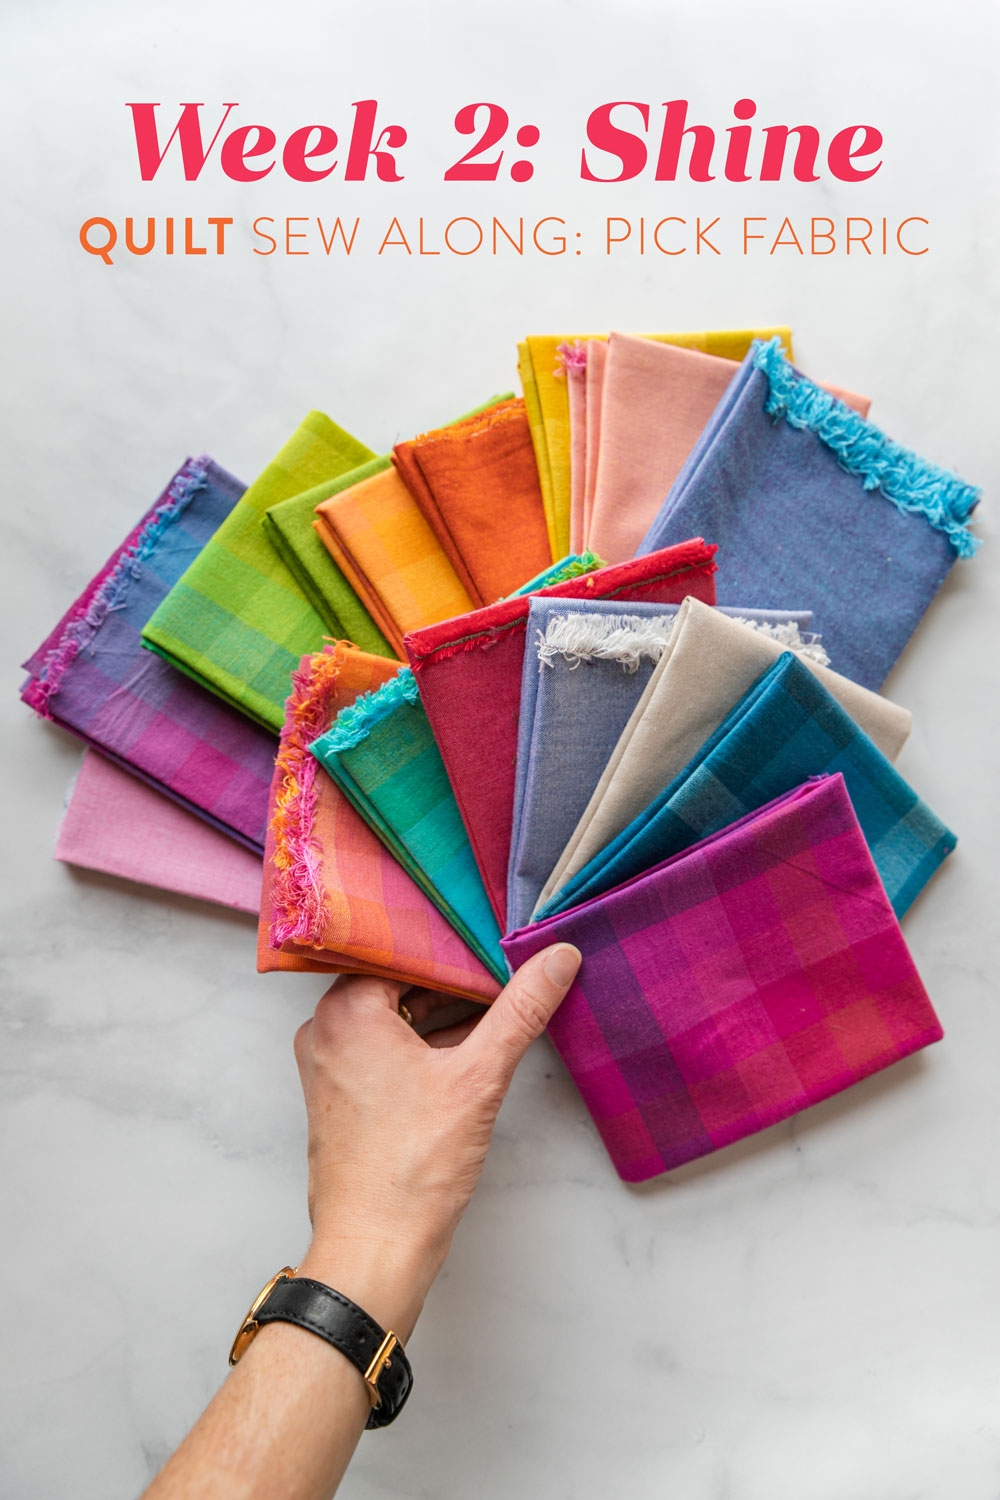 The Shine quilt sew along includes lots of added tips and videos to help you make this modern quilt pattern. This fat quarter quilt pattern is beginner friendly and focuses on improv sewing. suzyquilts.com #modernquilt #quilting